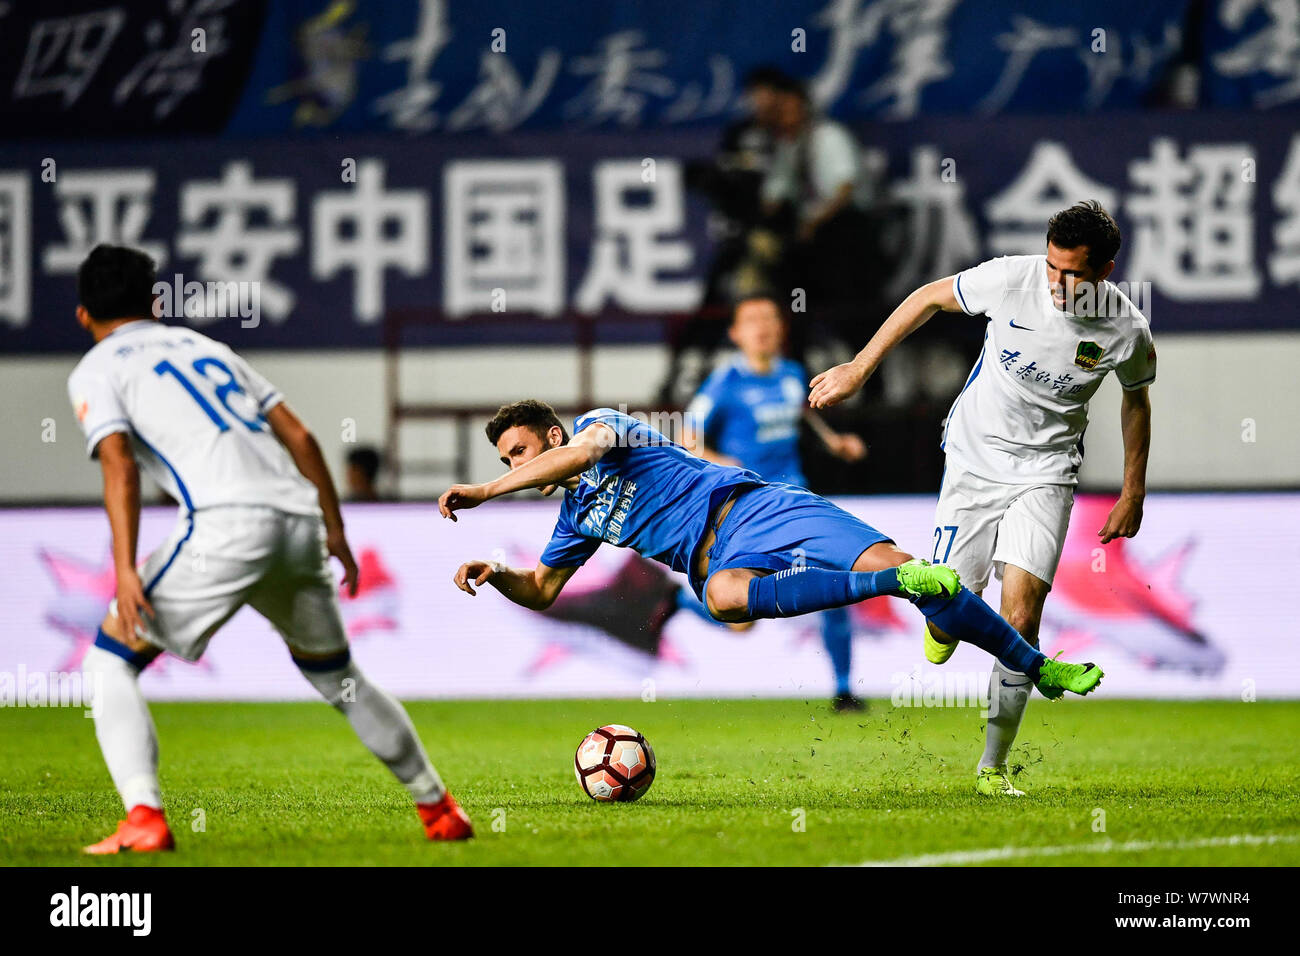 Greek Australian football player Apostolos Giannou of Guangzhou R&F, center, challenges Australian football player Ryan McGowan of Guizhou Zhicheng in Stock Photo